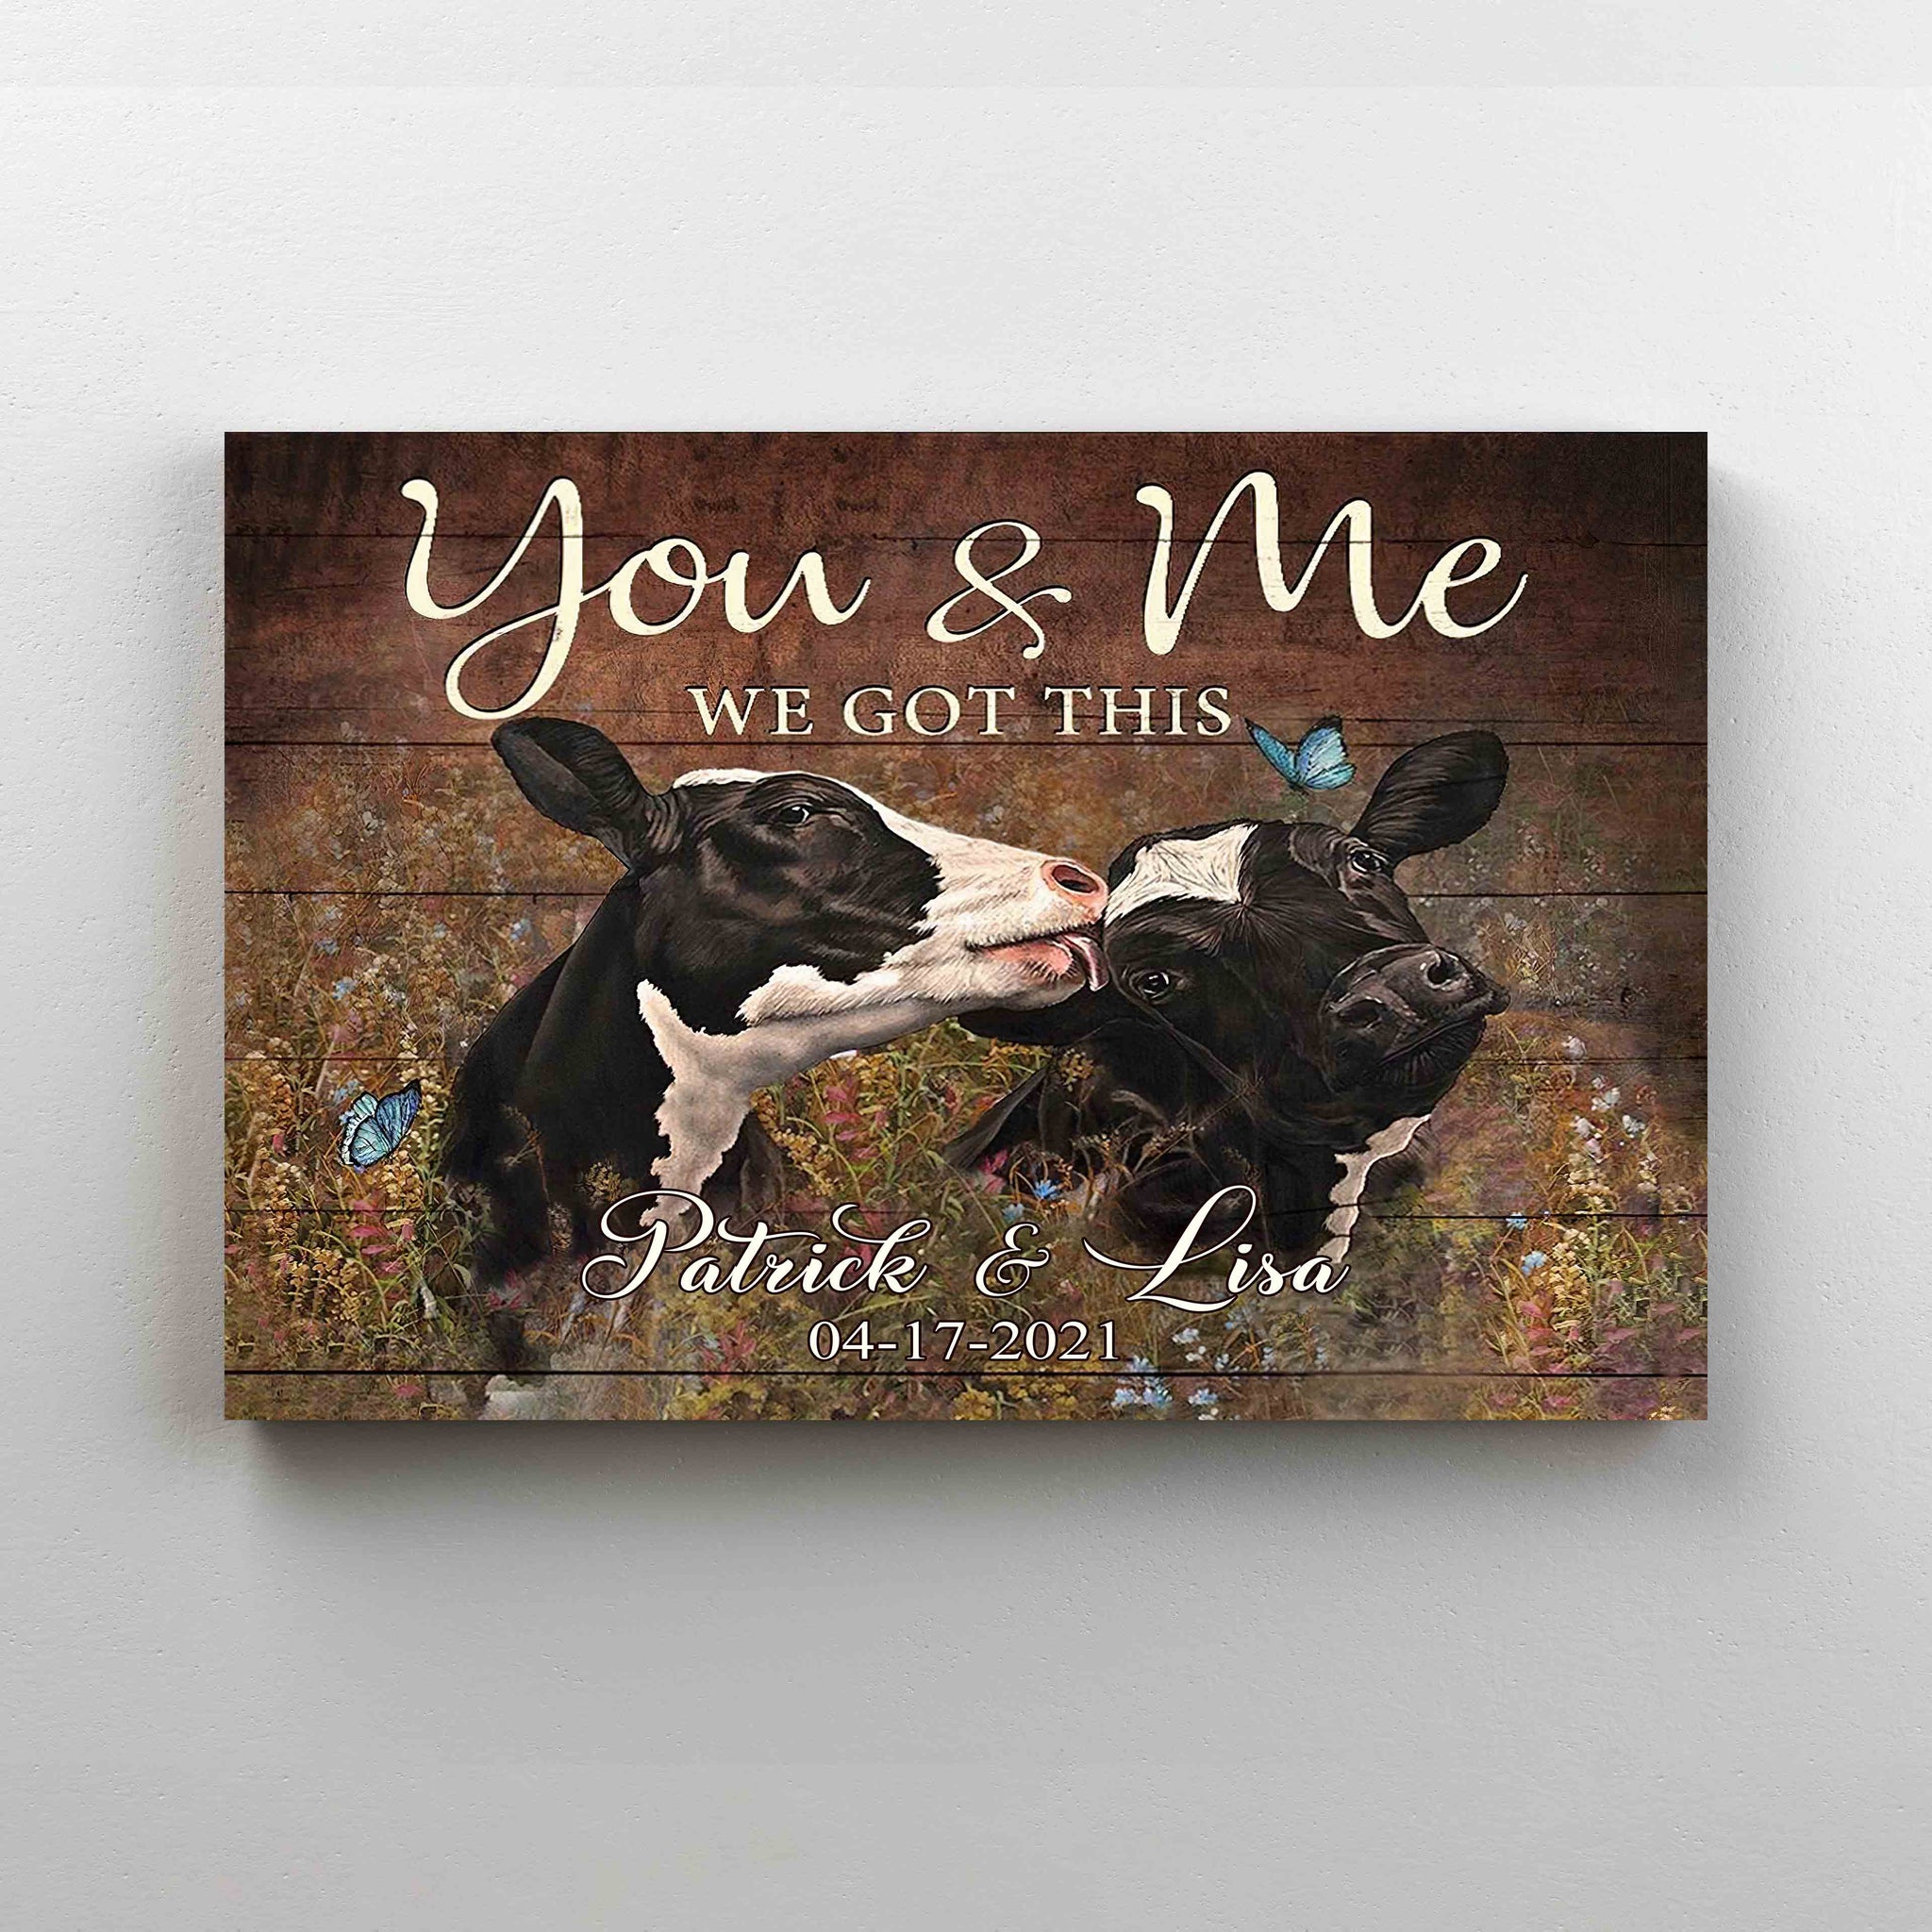 Personalized Name Canvas, You And Me We Got This Canvas, Milk Cow Canvas, Family Canvas